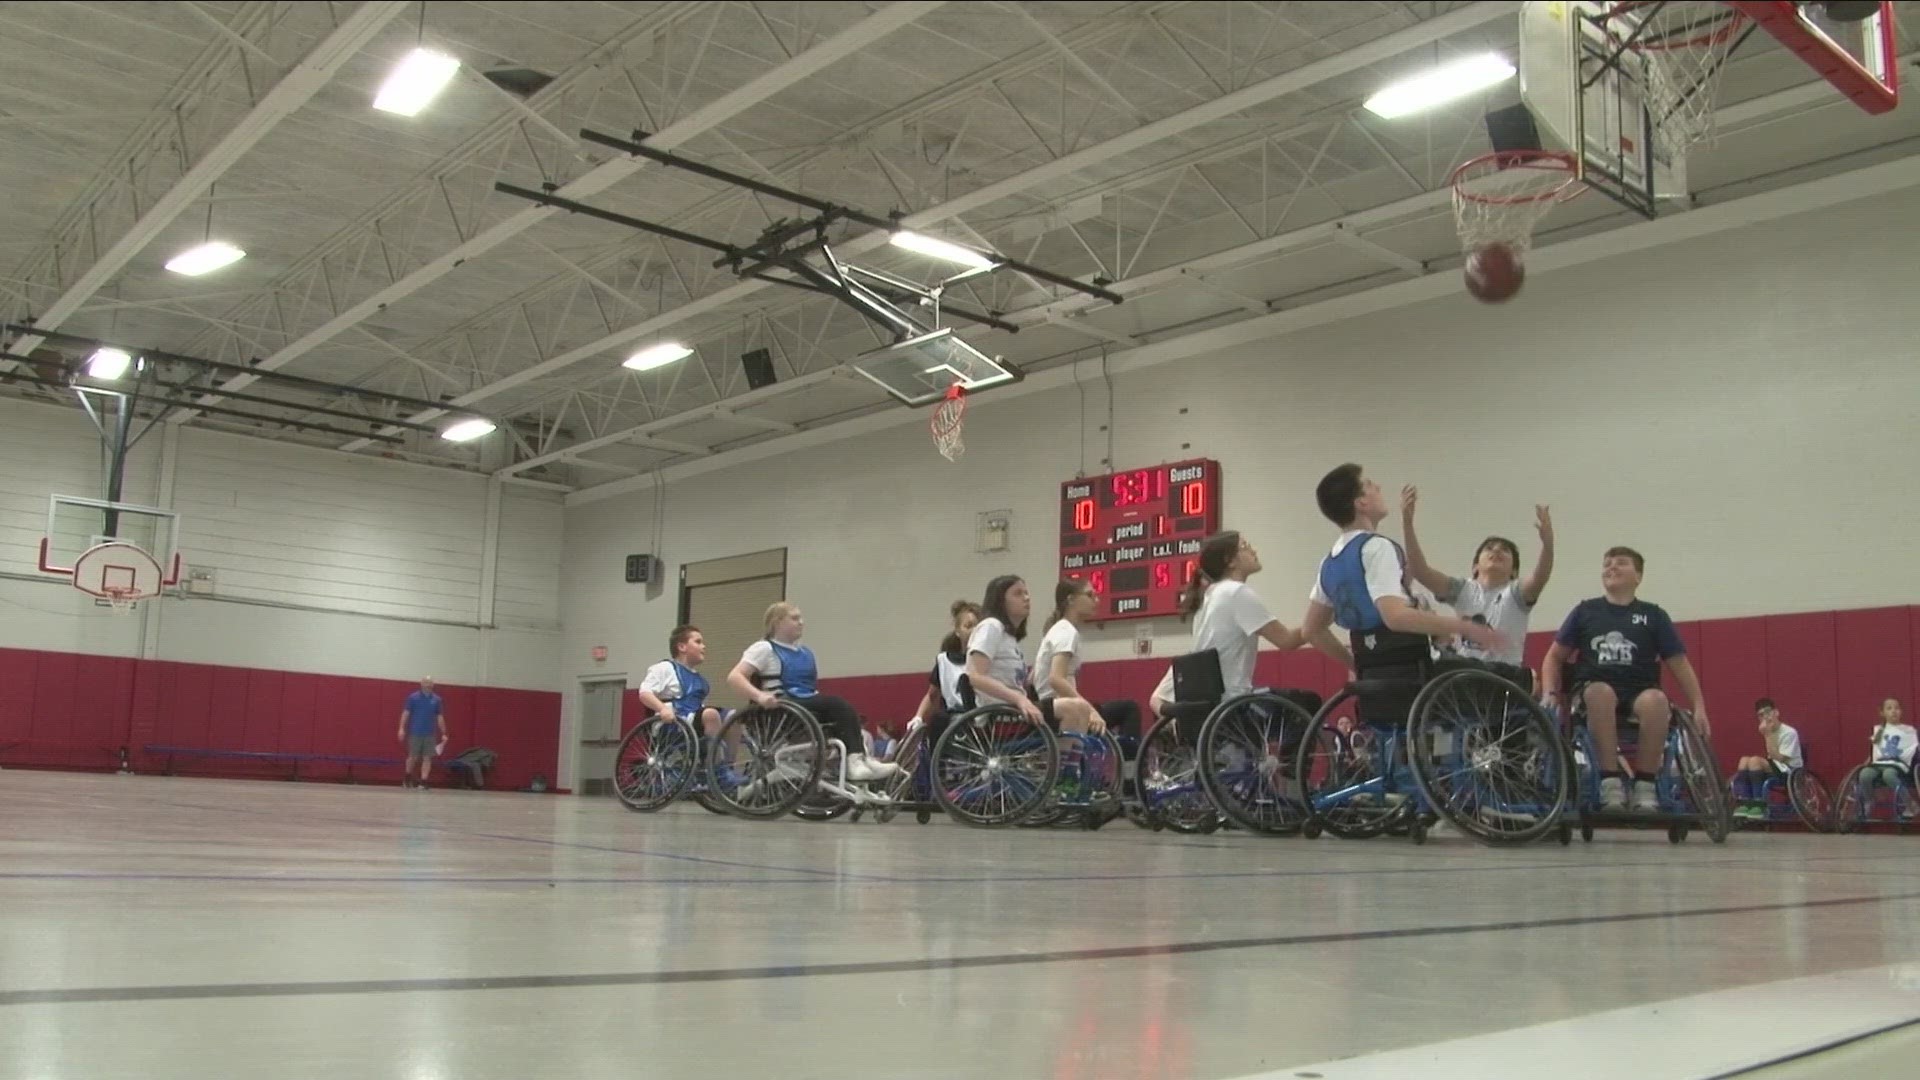 The aim of the second annual Droppin' Dimes for Wheels fundraising wheelchair basketball game is to raise awareness and promote inclusion across sports.